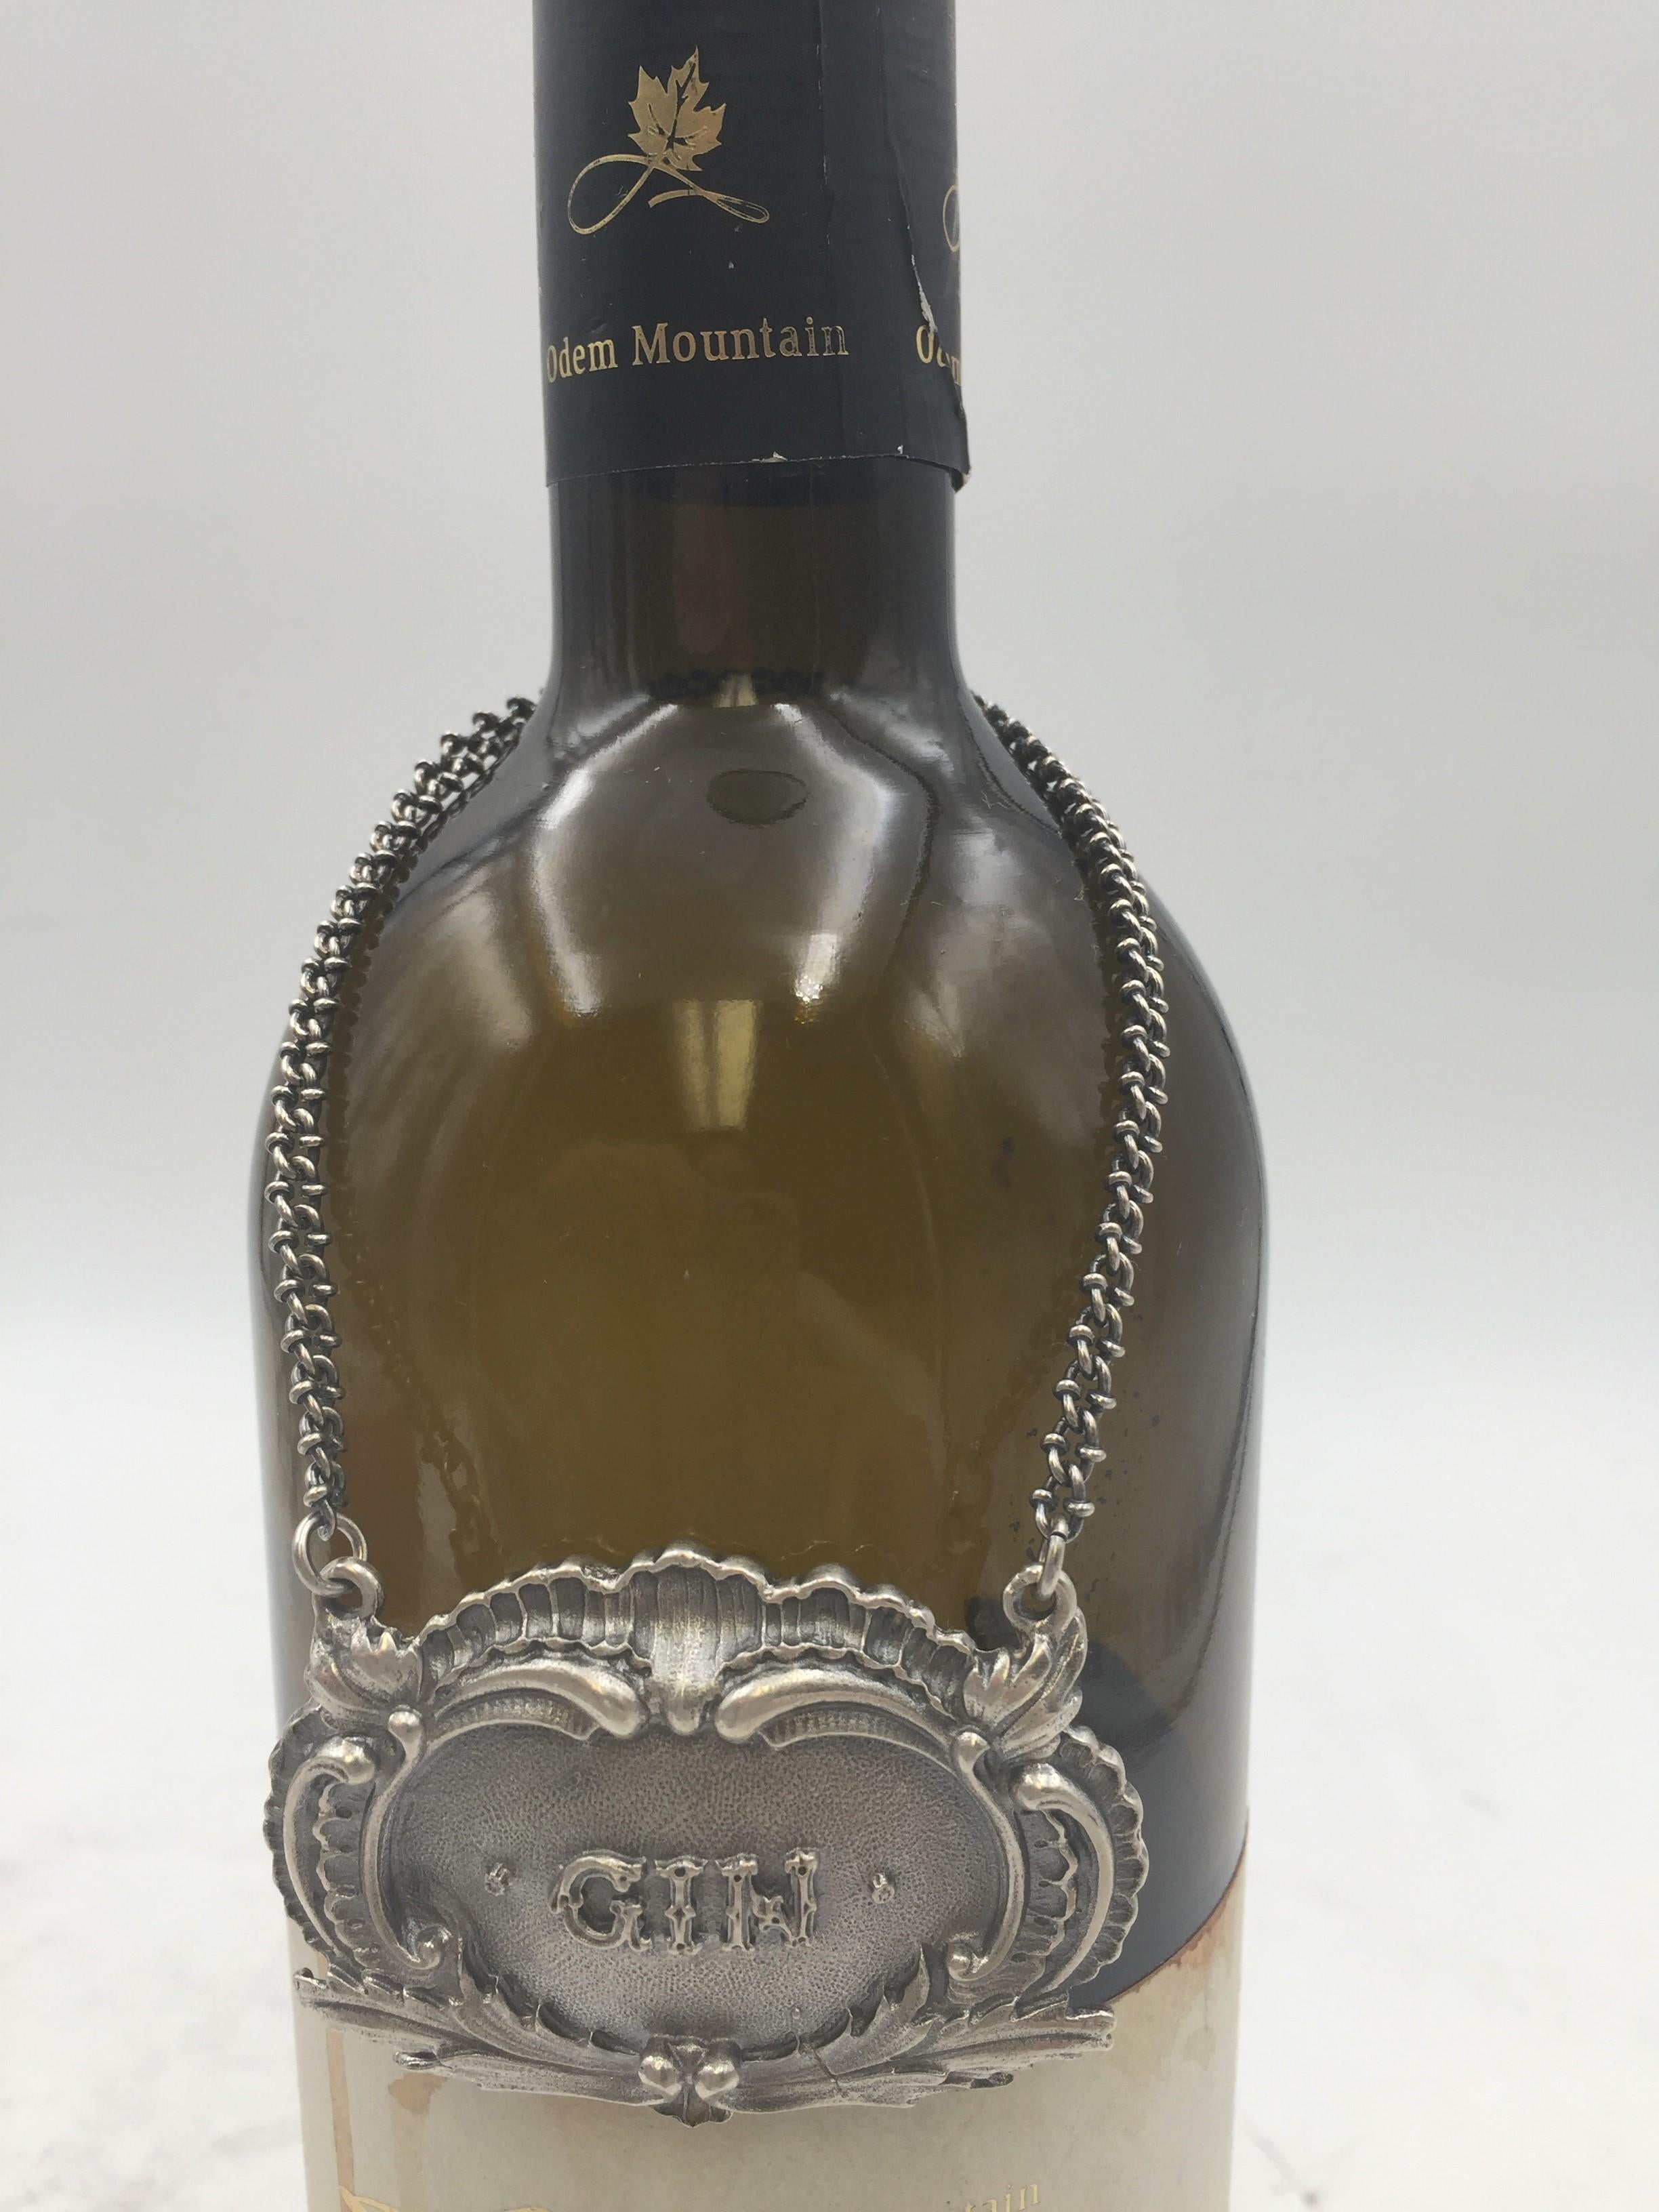 Rare Buccellati sterling silver claret jug bar label. GIN embossed on the front in the center.

Marks on the back: Gianmaria Buccellati (signature and Italian maker's mark), ITALY, 925 (encircled silver purity mark).

Dimensions: 2.25 in x 1.5 in.